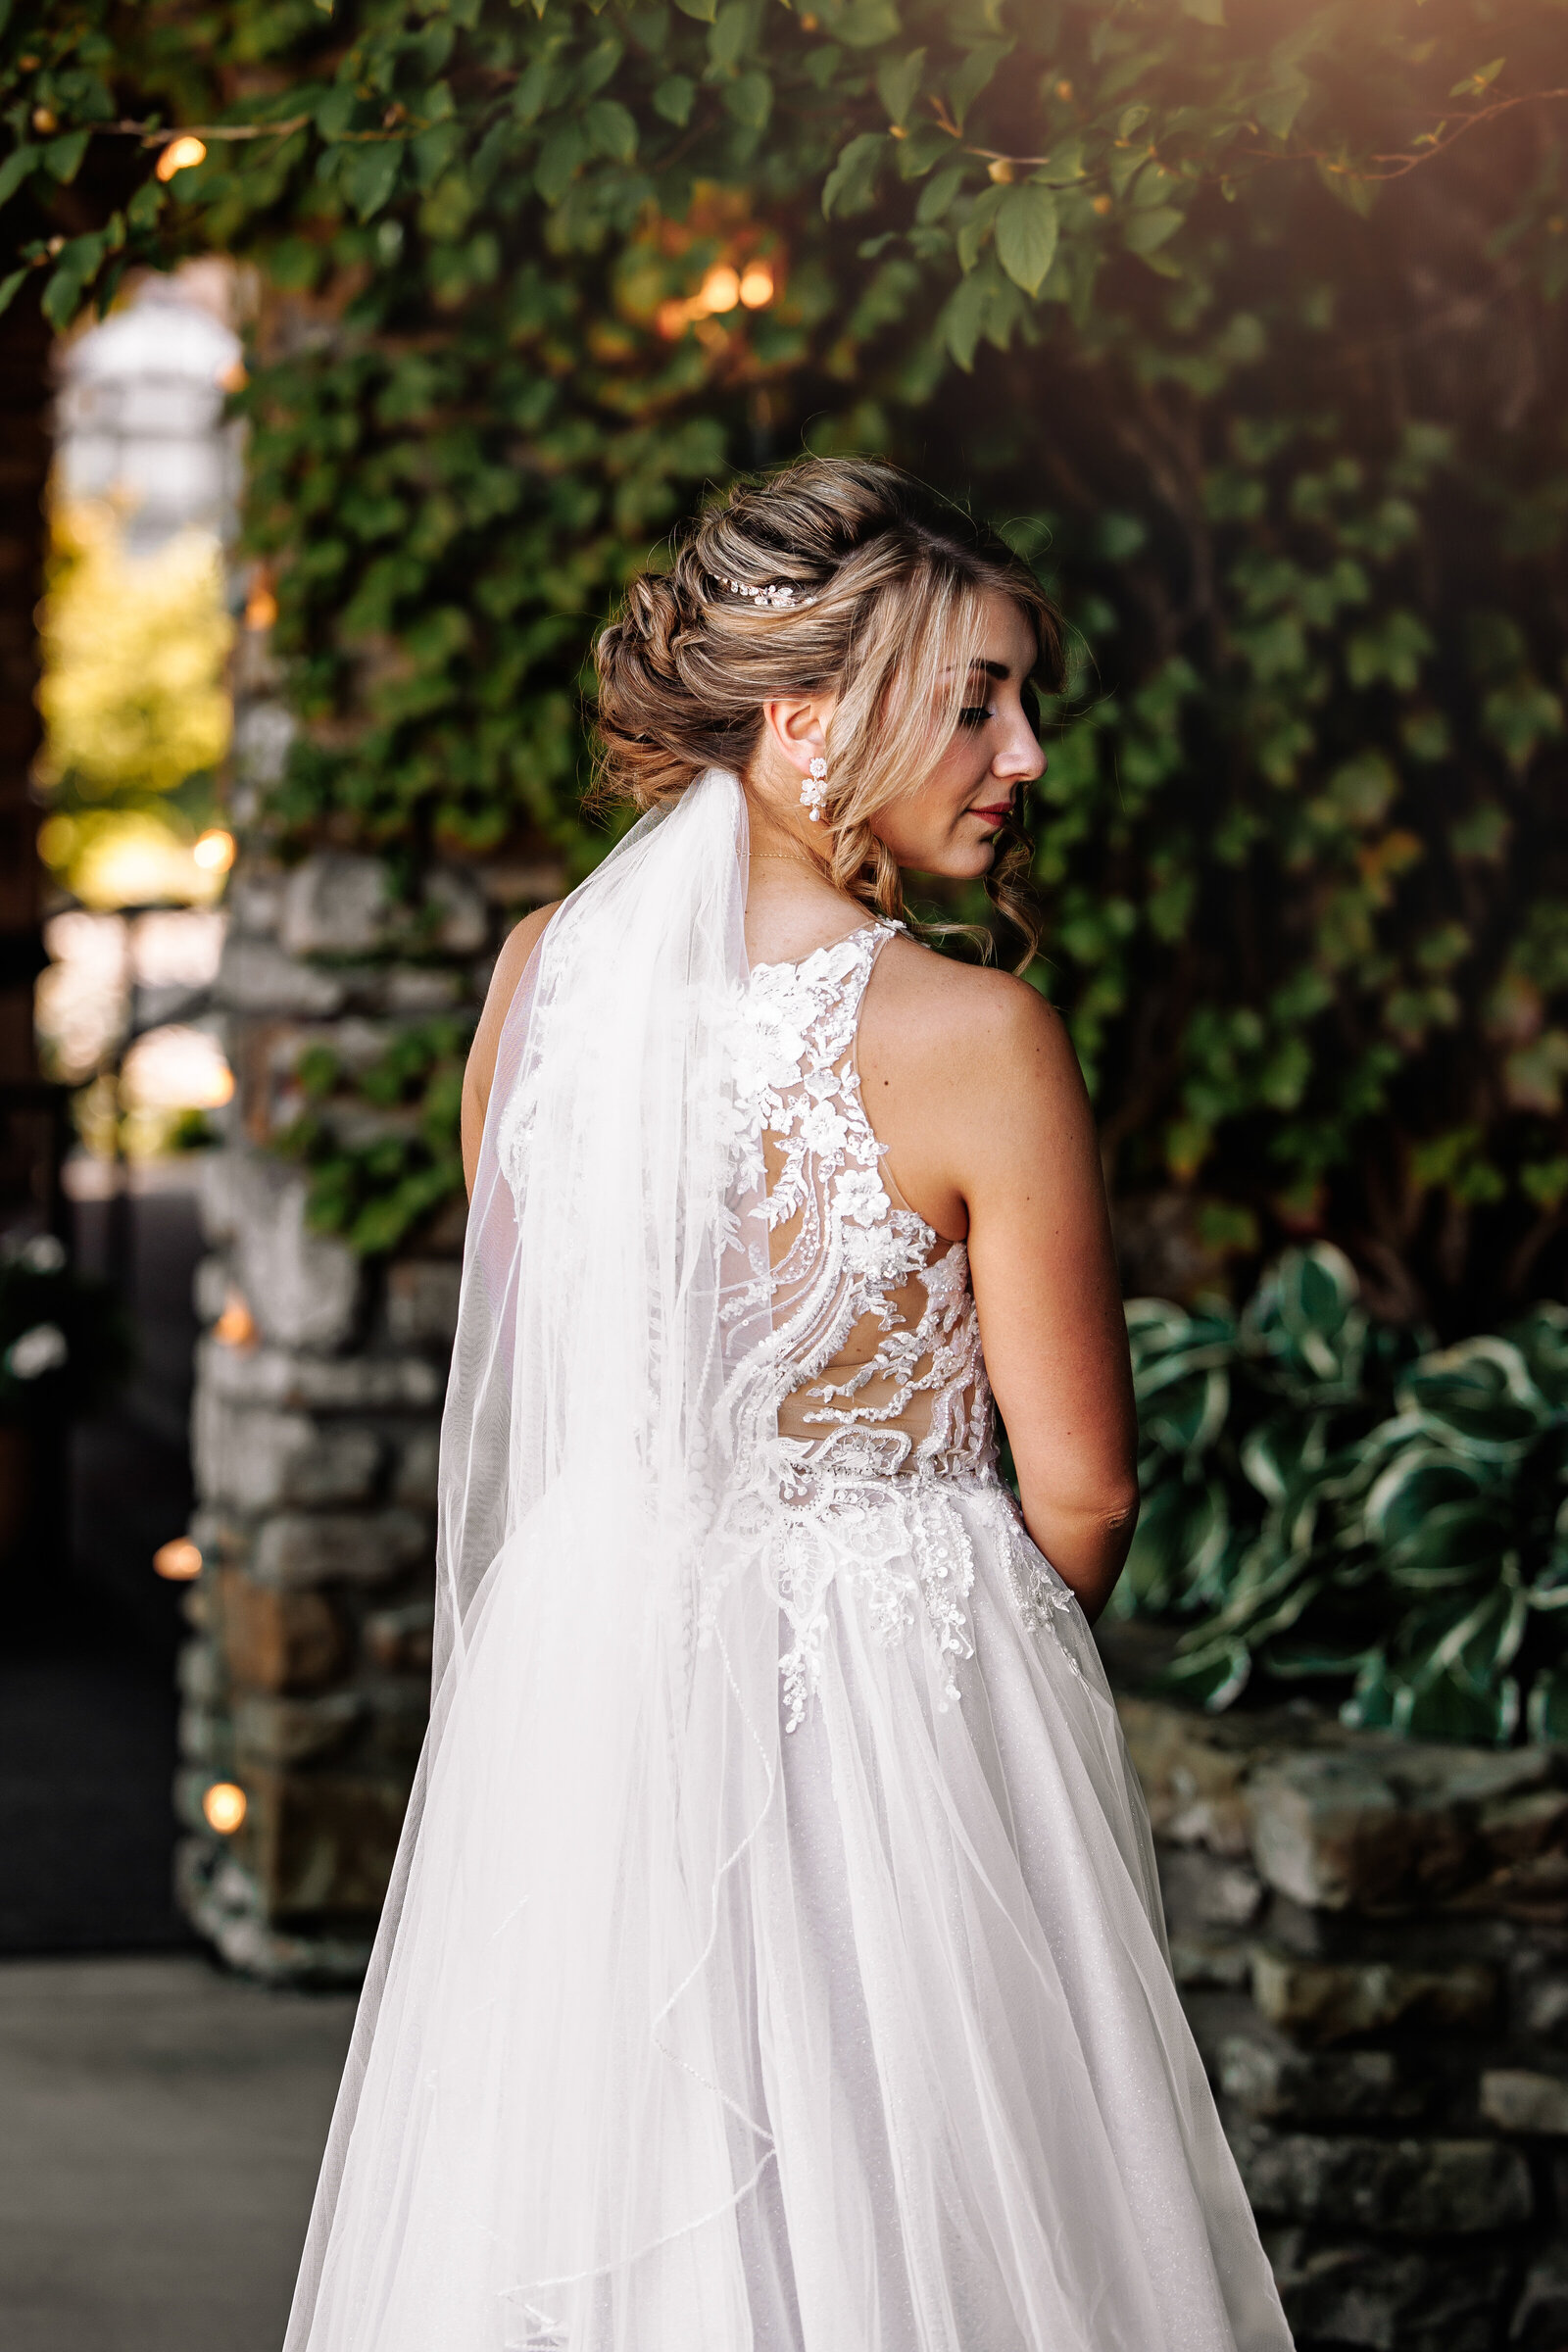 Bride looking over shoulder, shows off her beautiful gown